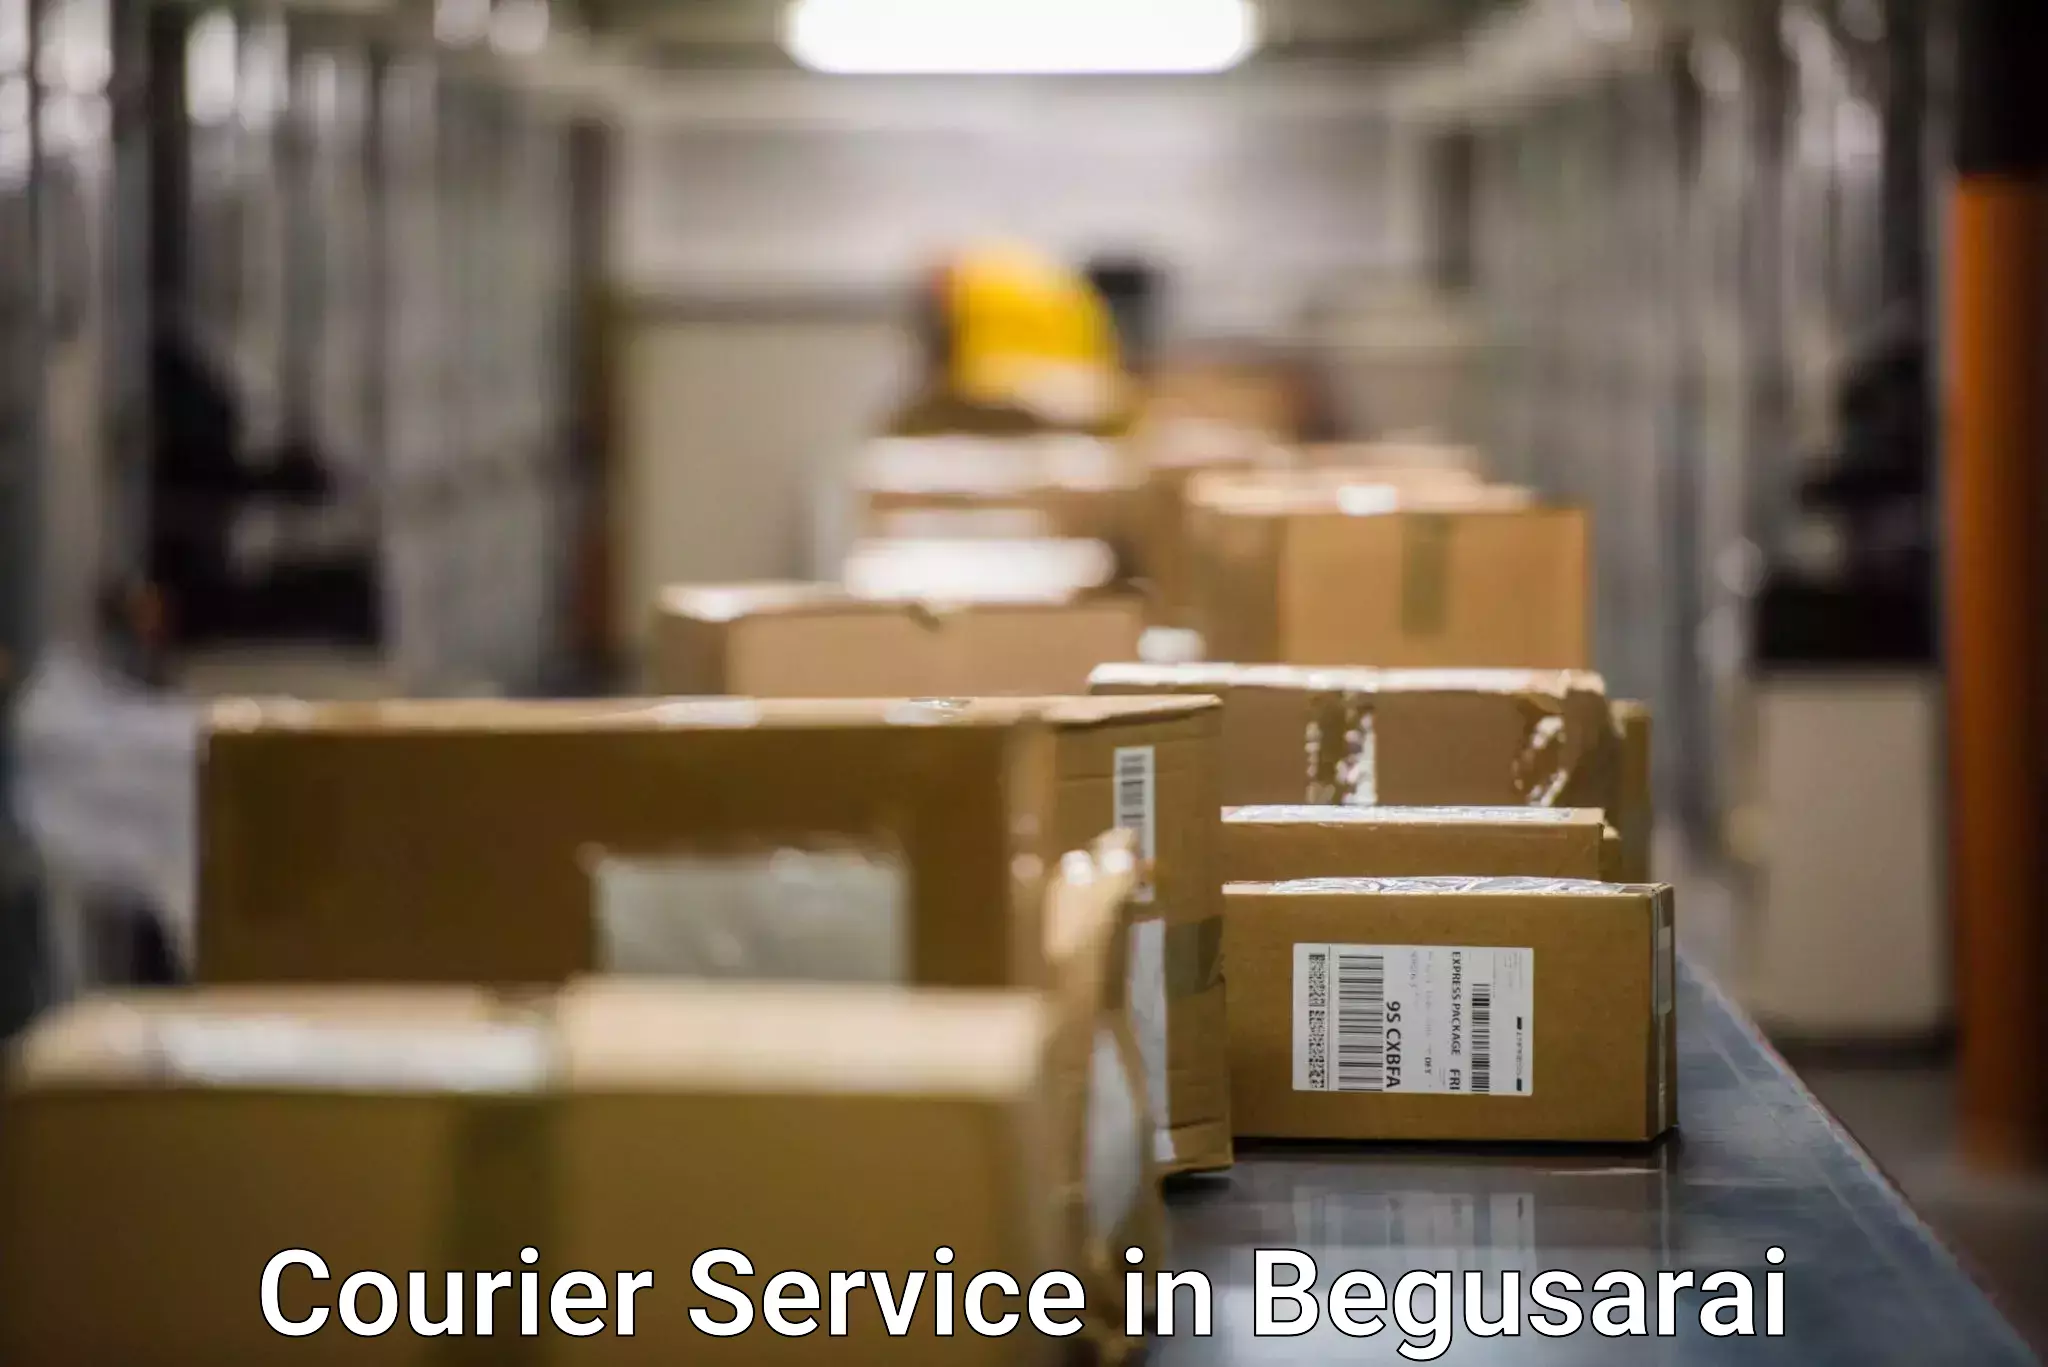 Courier service booking in Begusarai